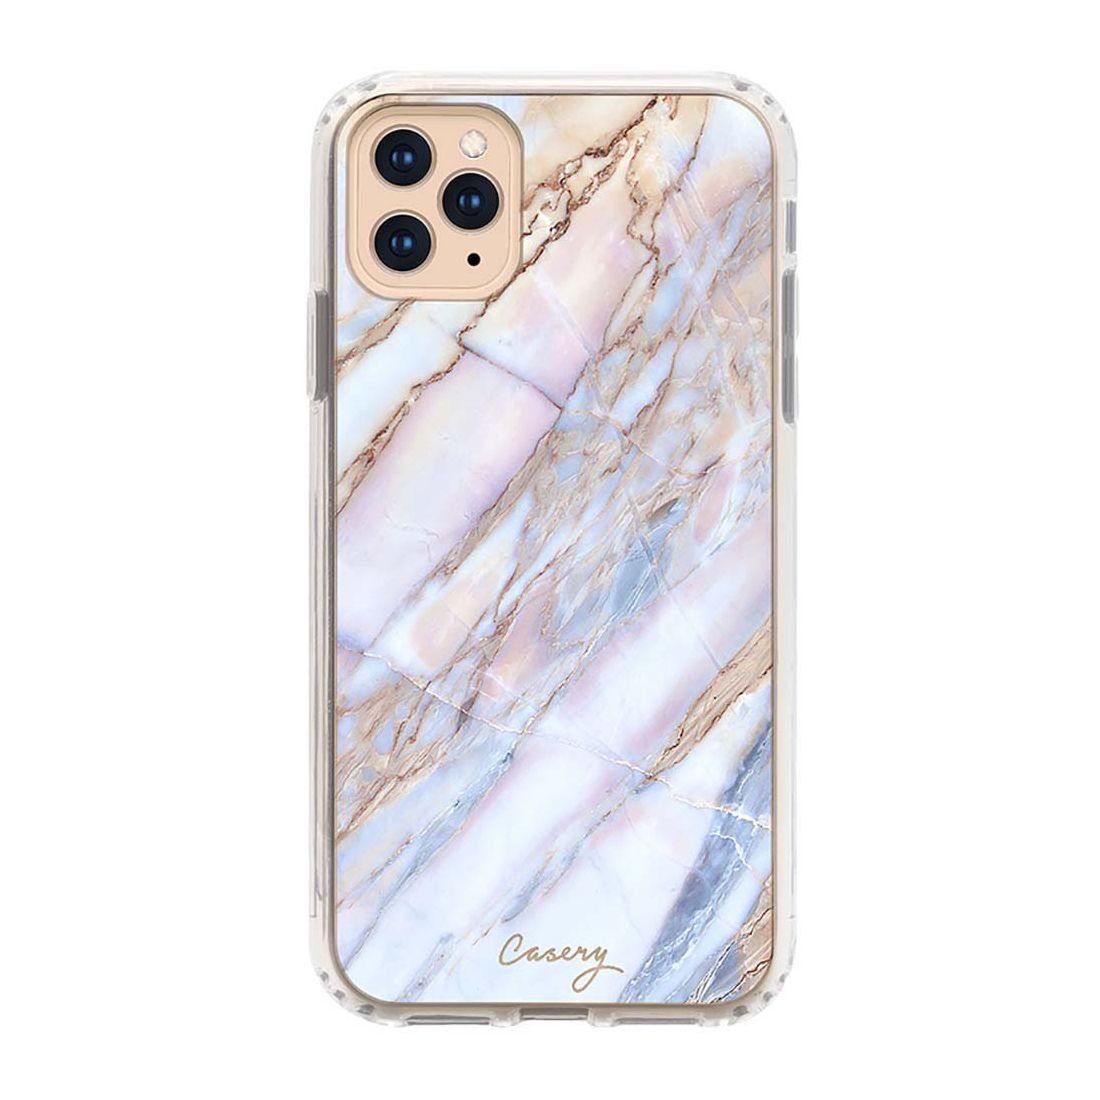 Casery Shatter Marble Case for iPhone 12 Pro Max